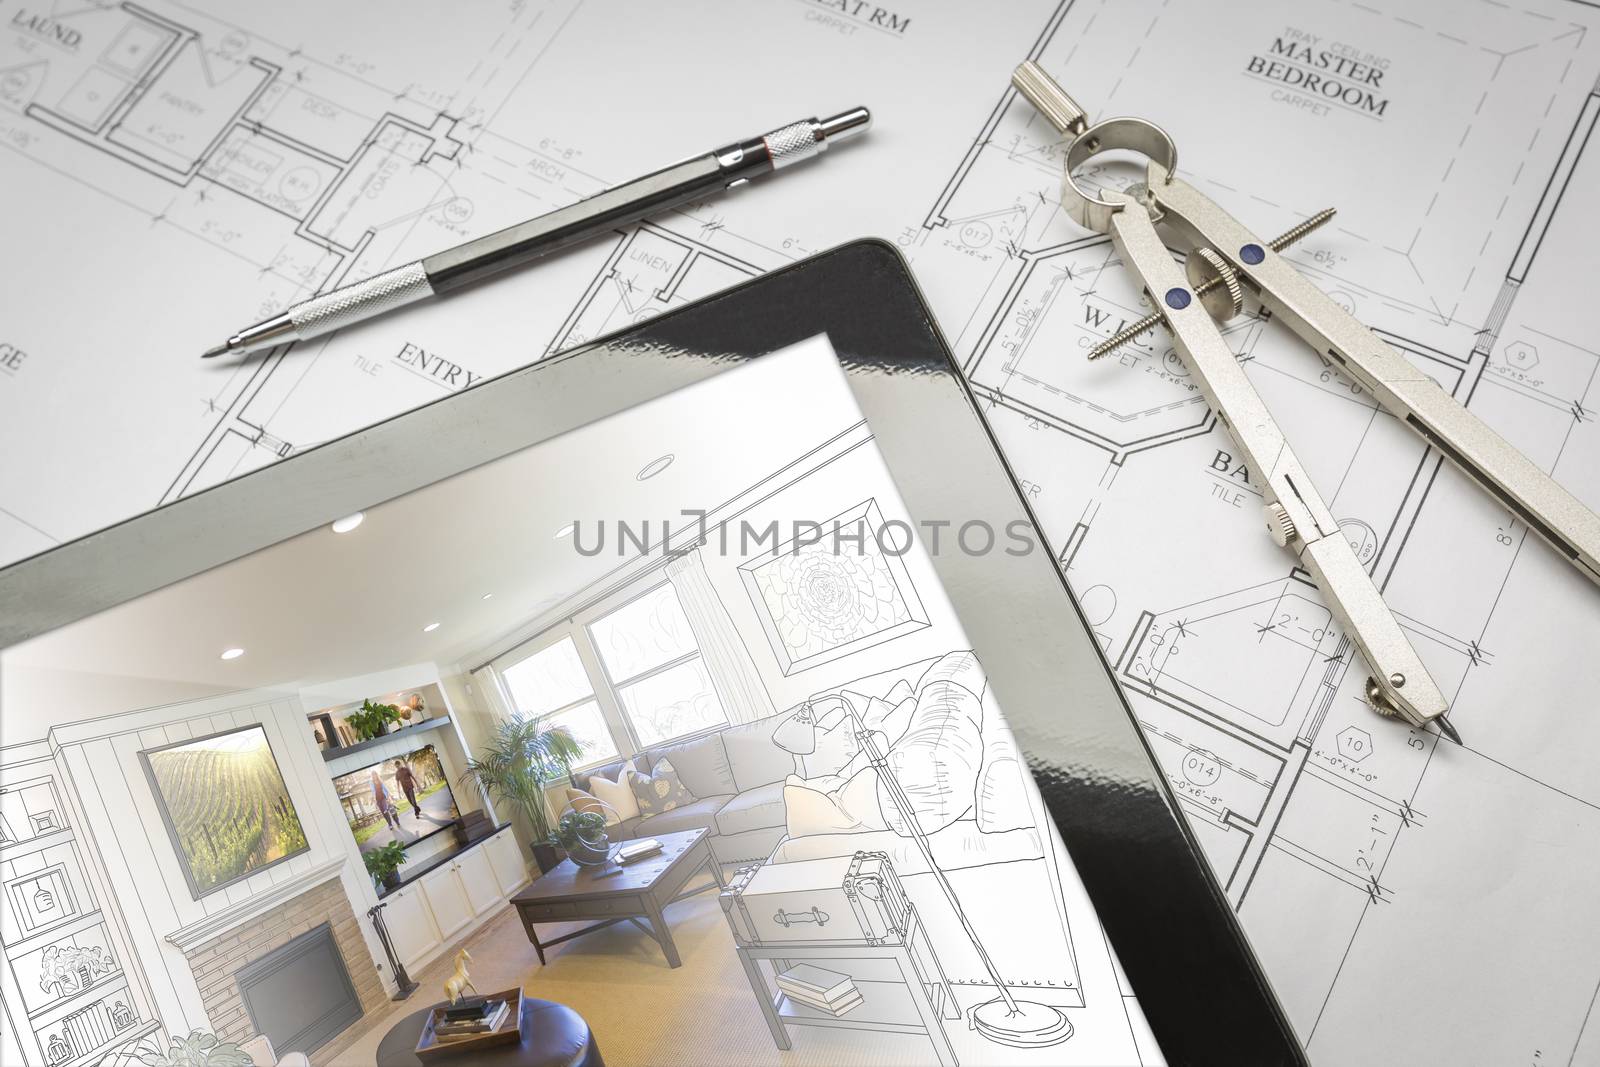 Computer Tablet Showing Living Room Illustration Sitting On House Plans With Pencil and Compass.